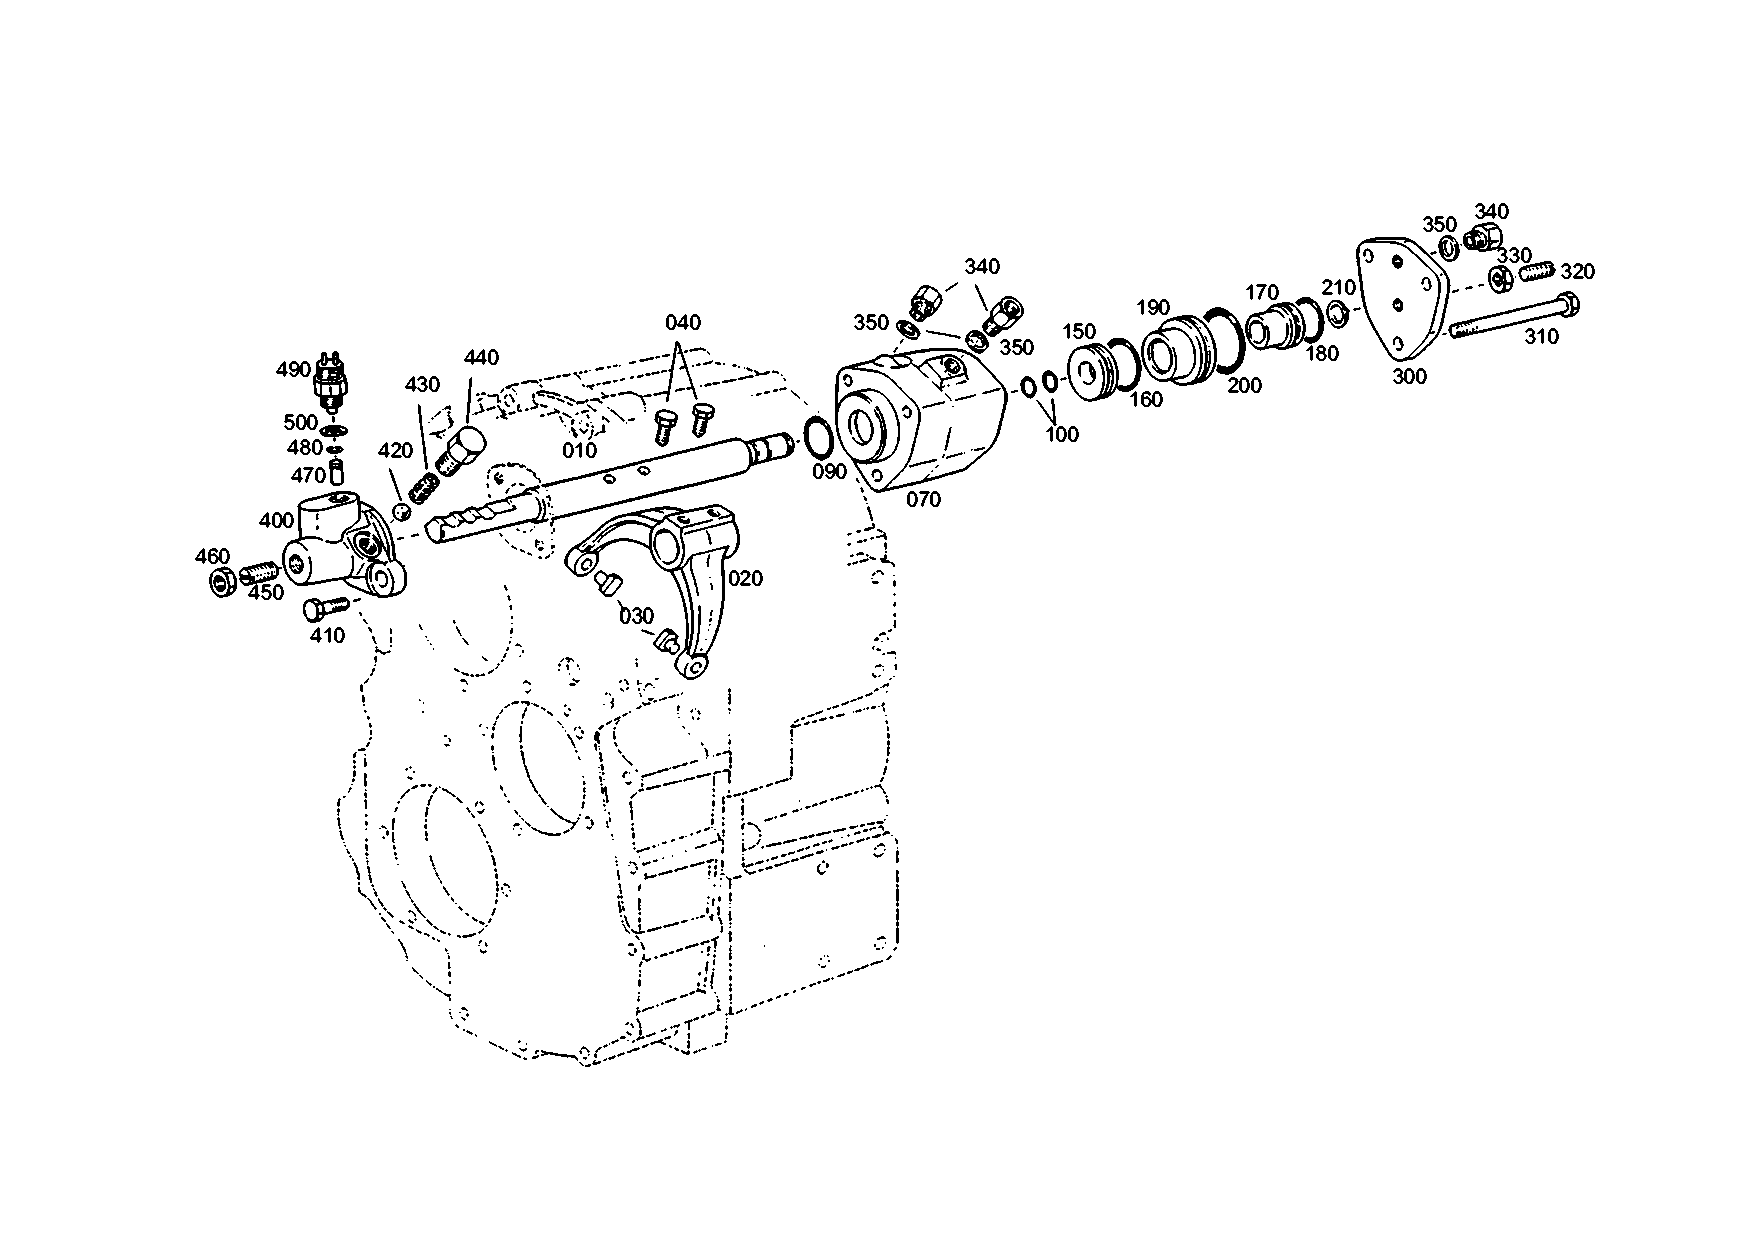 drawing for MARMON Herring MVG202061 - PIN (figure 1)